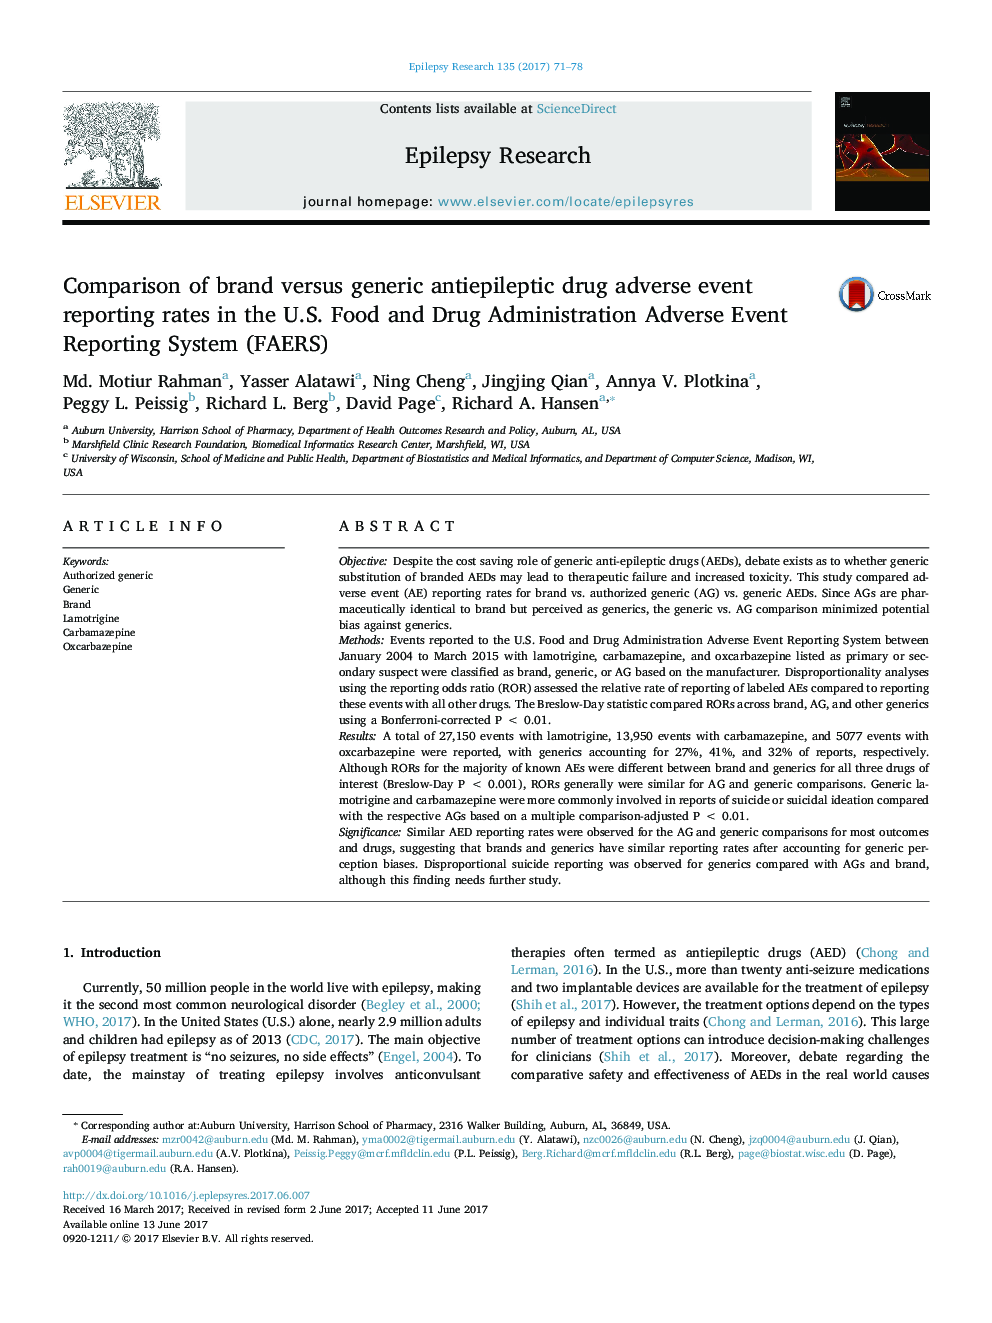 Comparison of brand versus generic antiepileptic drug adverse event reporting rates in the U.S. Food and Drug Administration Adverse Event Reporting System (FAERS)